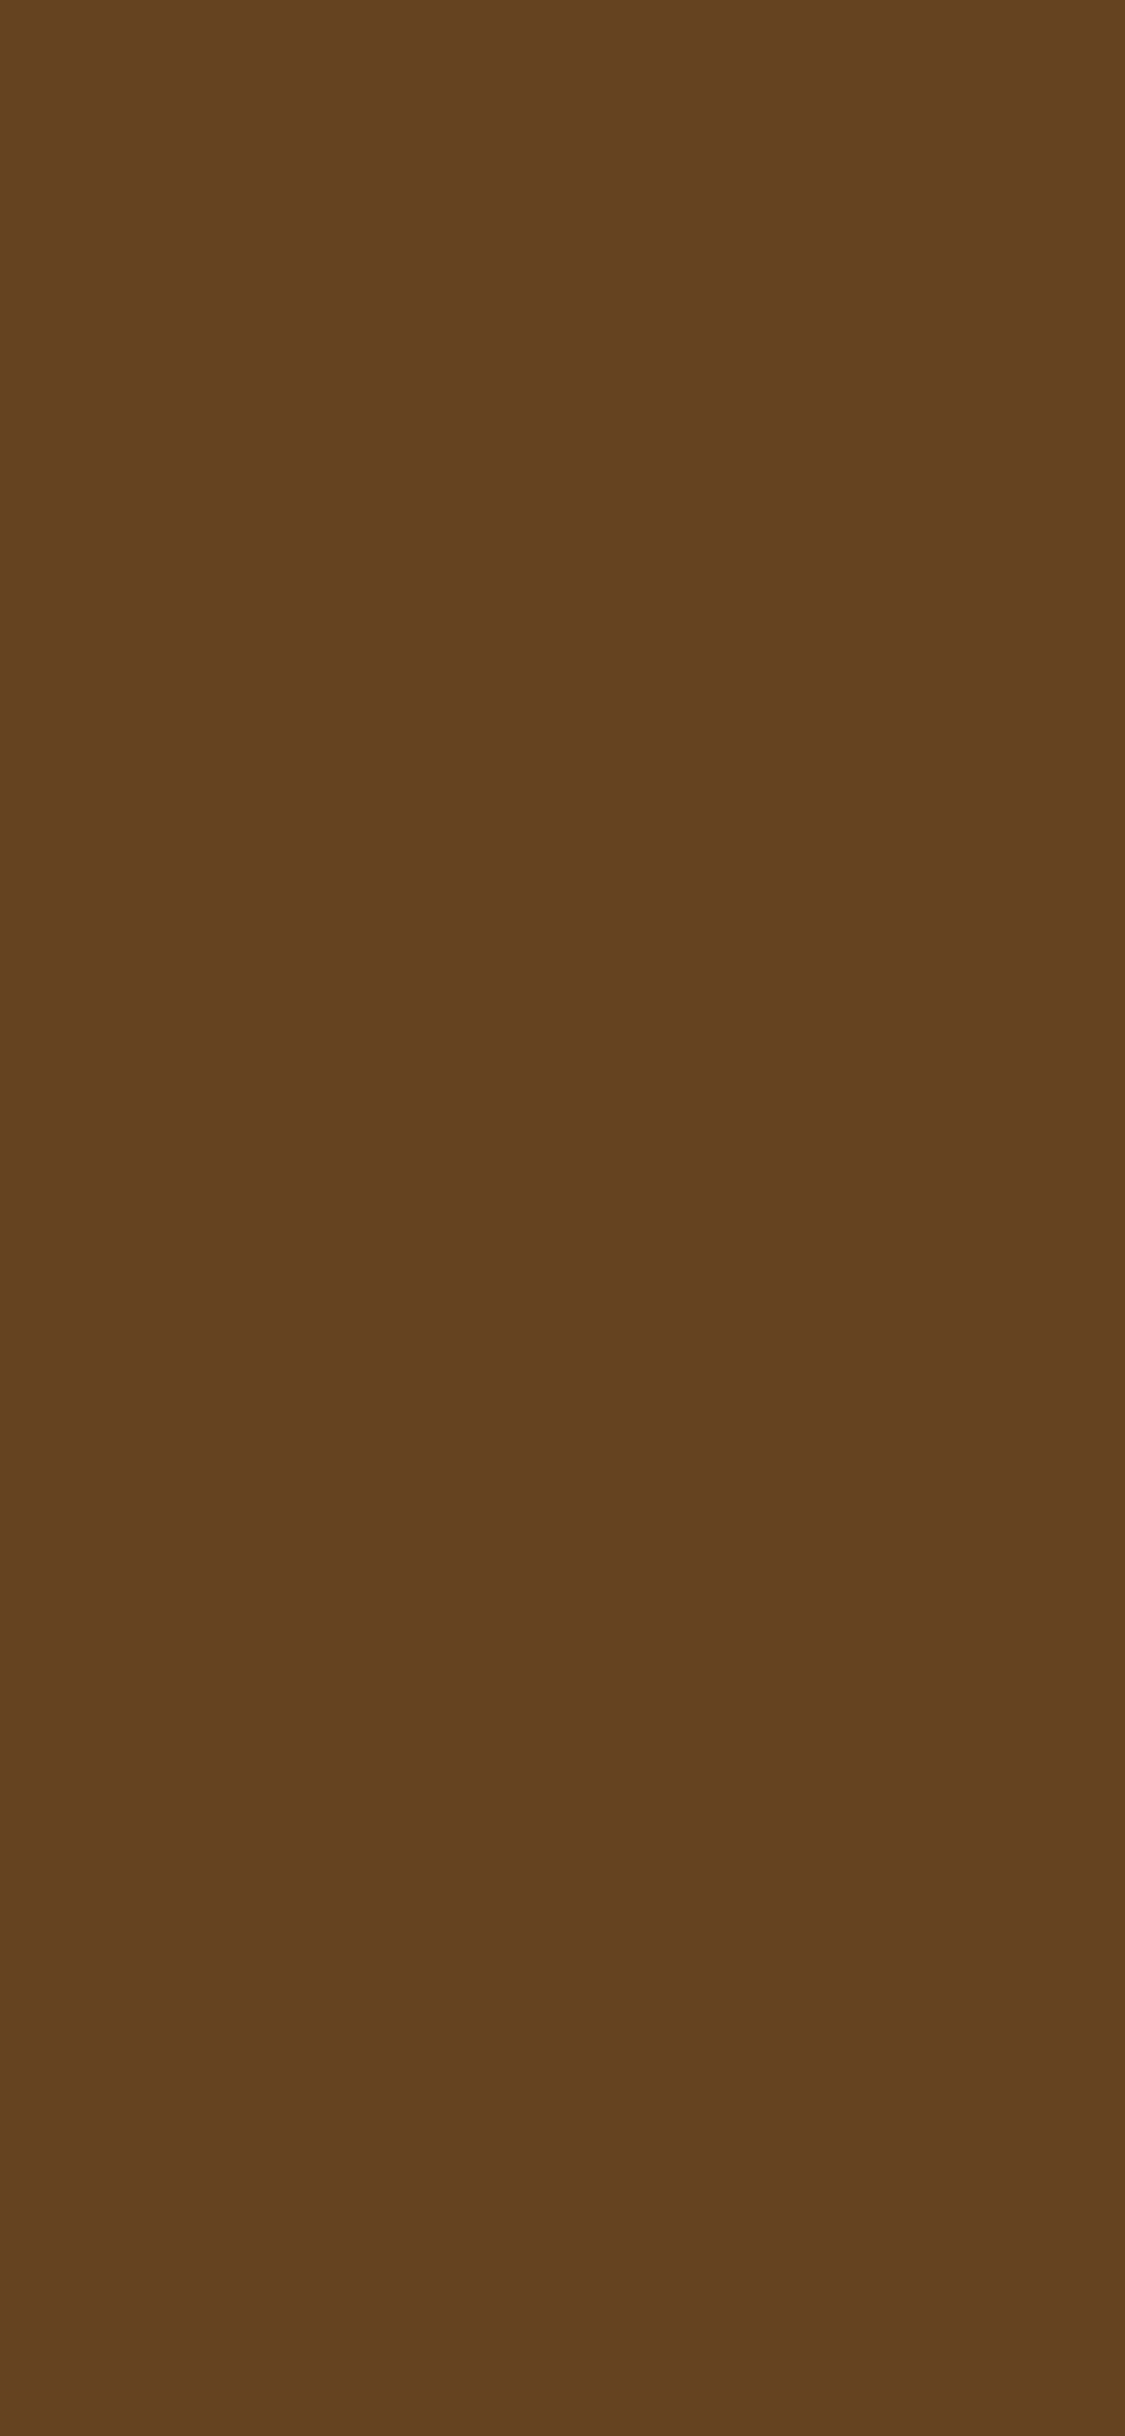 1125x2436 Otter Brown Solid Color Background